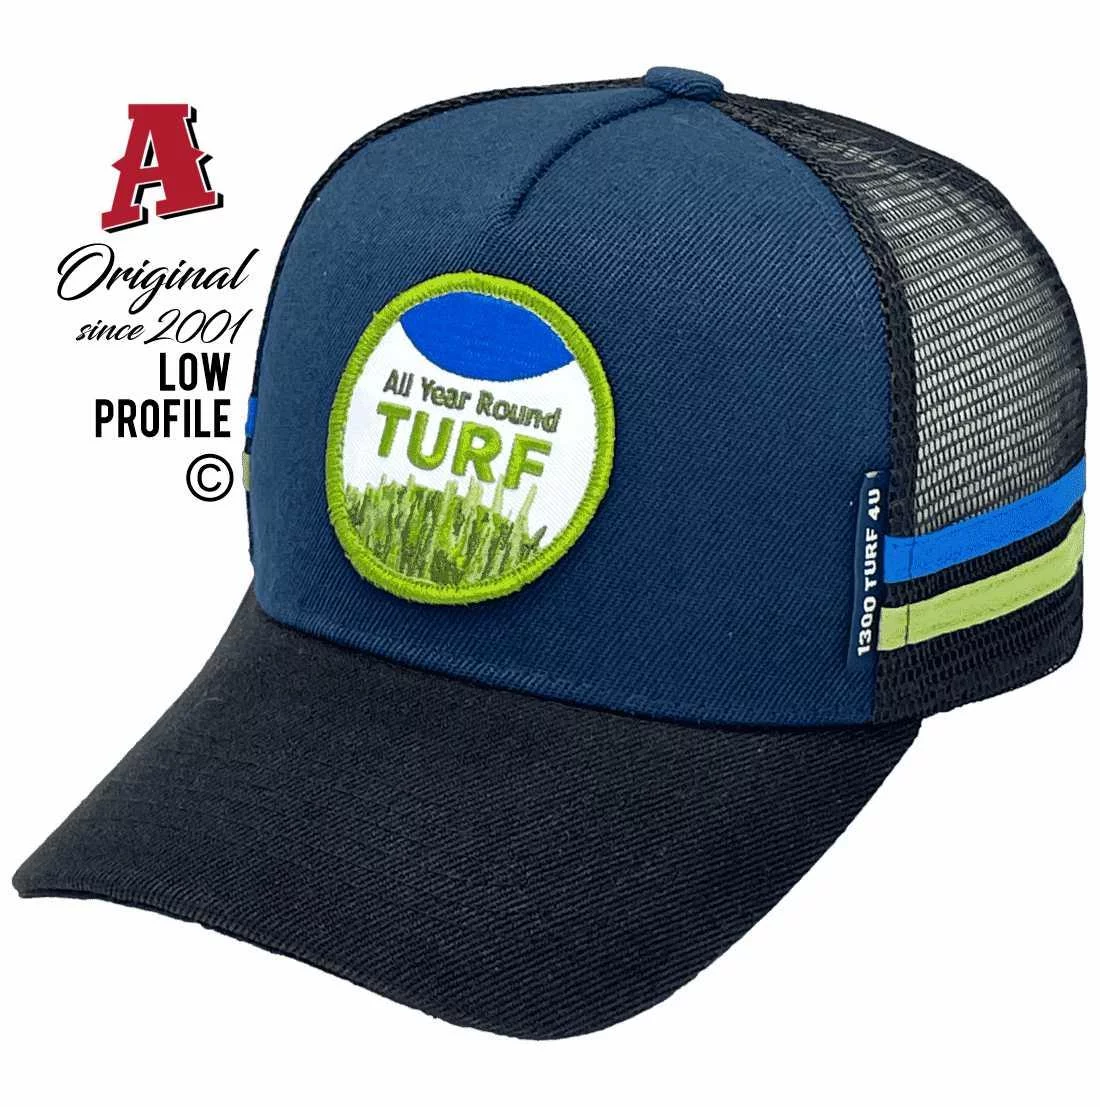 All Year Round Turf Wilberforce NSW Basic Aussie Trucker Hats Low Profile with Sewn on Round Embroidered Badge with Merrow Edge